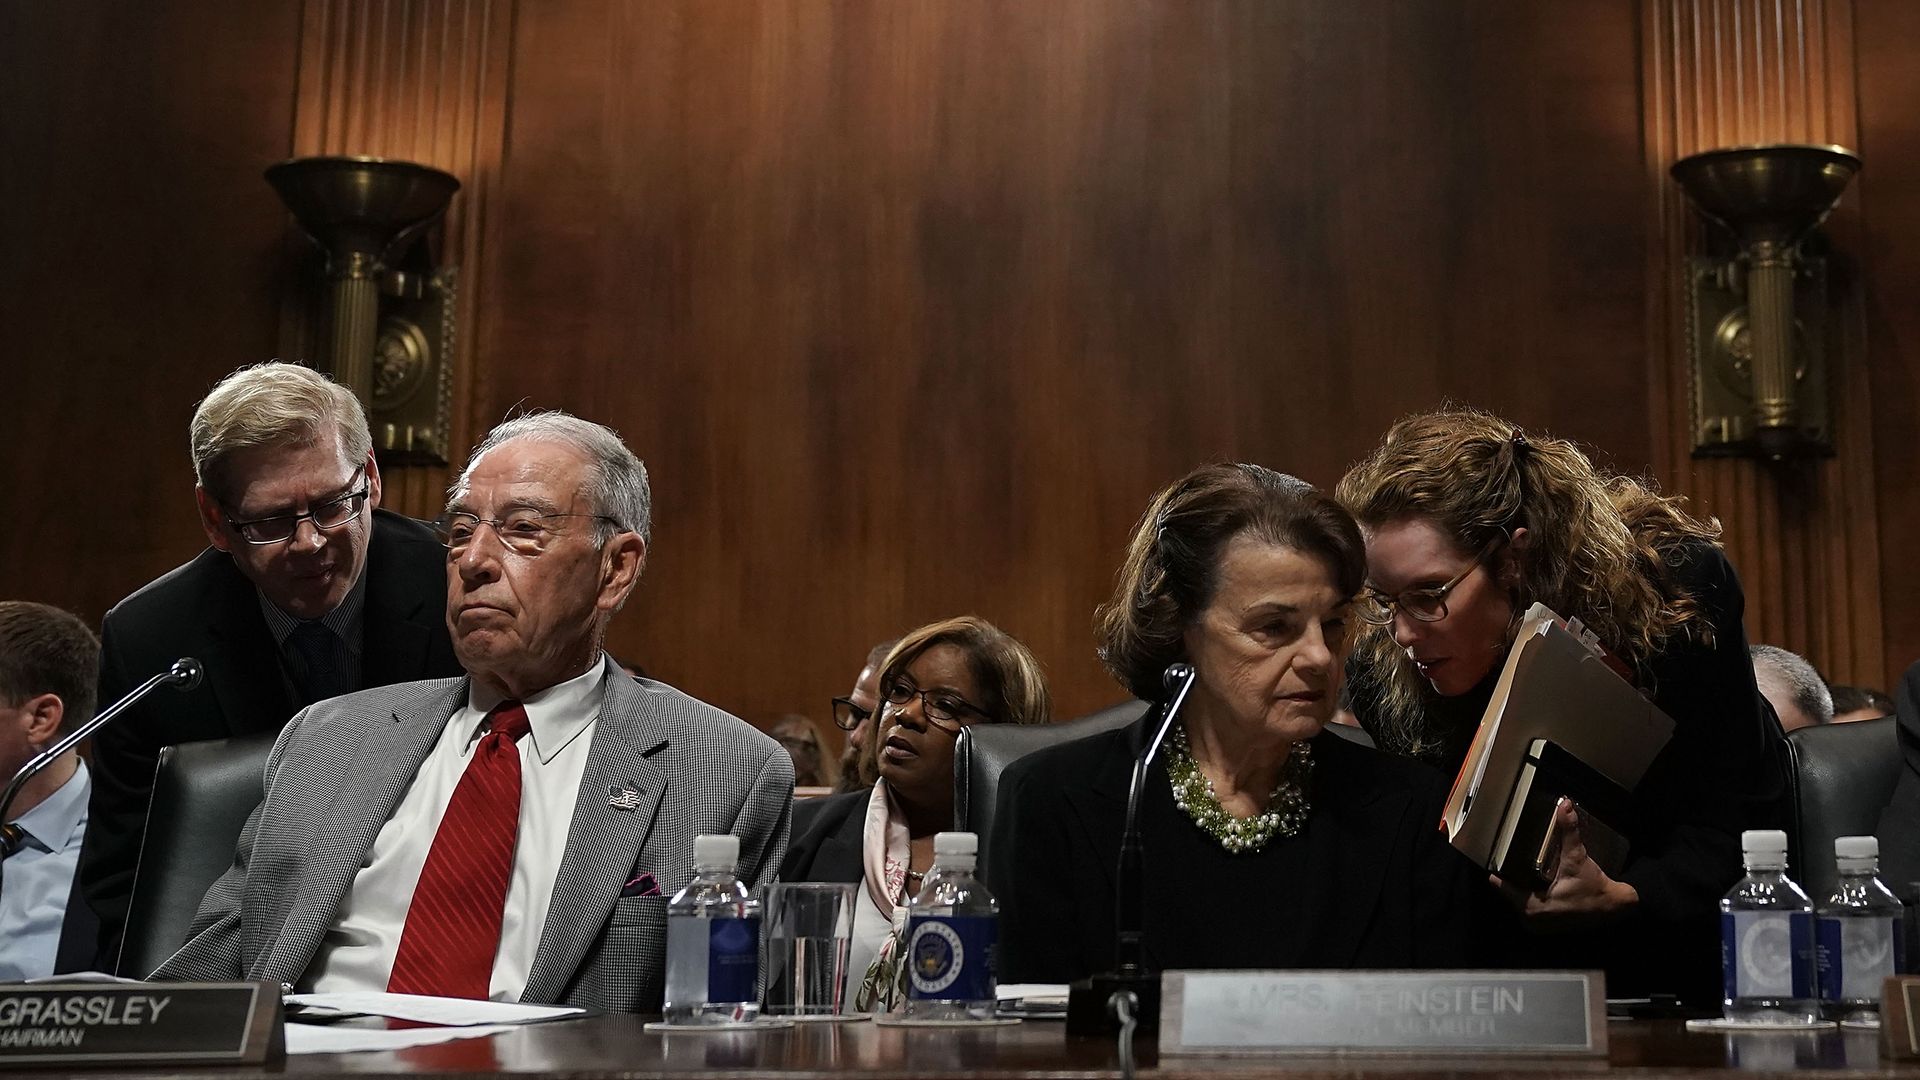 Chuck Grassley and Dianne Feinstein talking to their aides in a briefing room. 